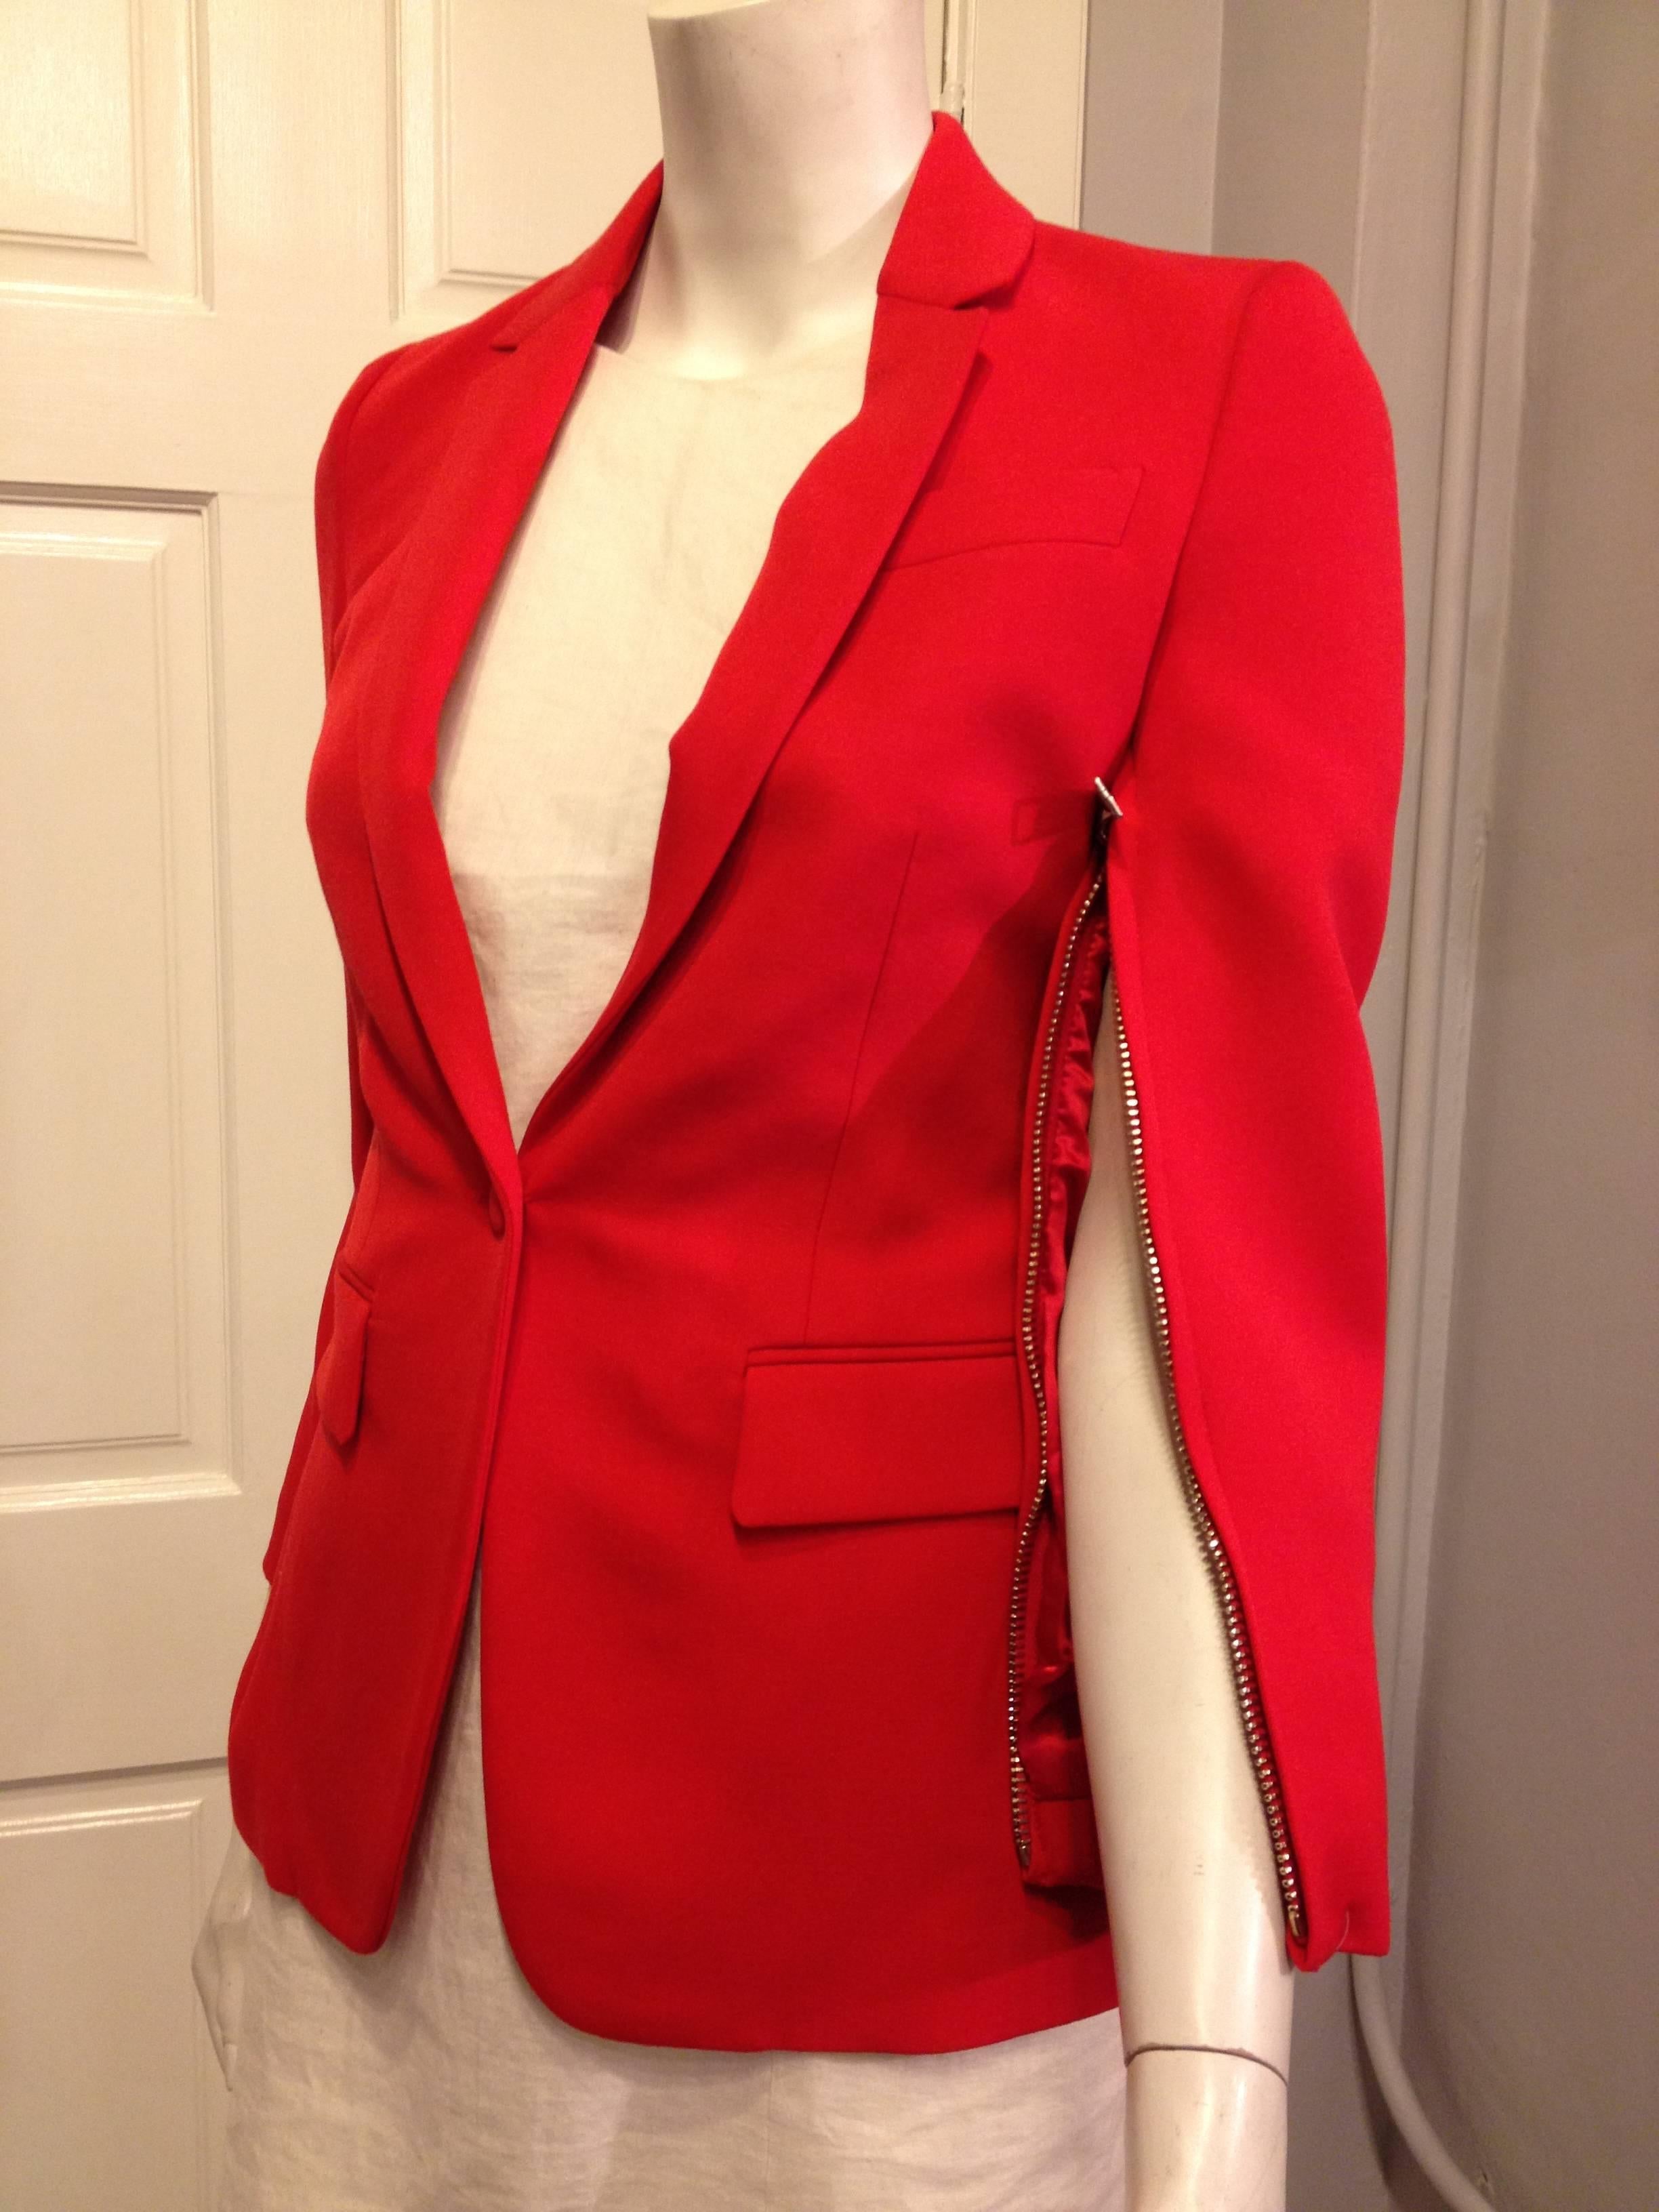 The absolutely gorgeous cut of this blazer is even more perfect in a vibrant, lush orangey red vermillion. The modern single button closure cinches the waist, while the slender lapels and hip pockets create an hourglass shape. The underside of each